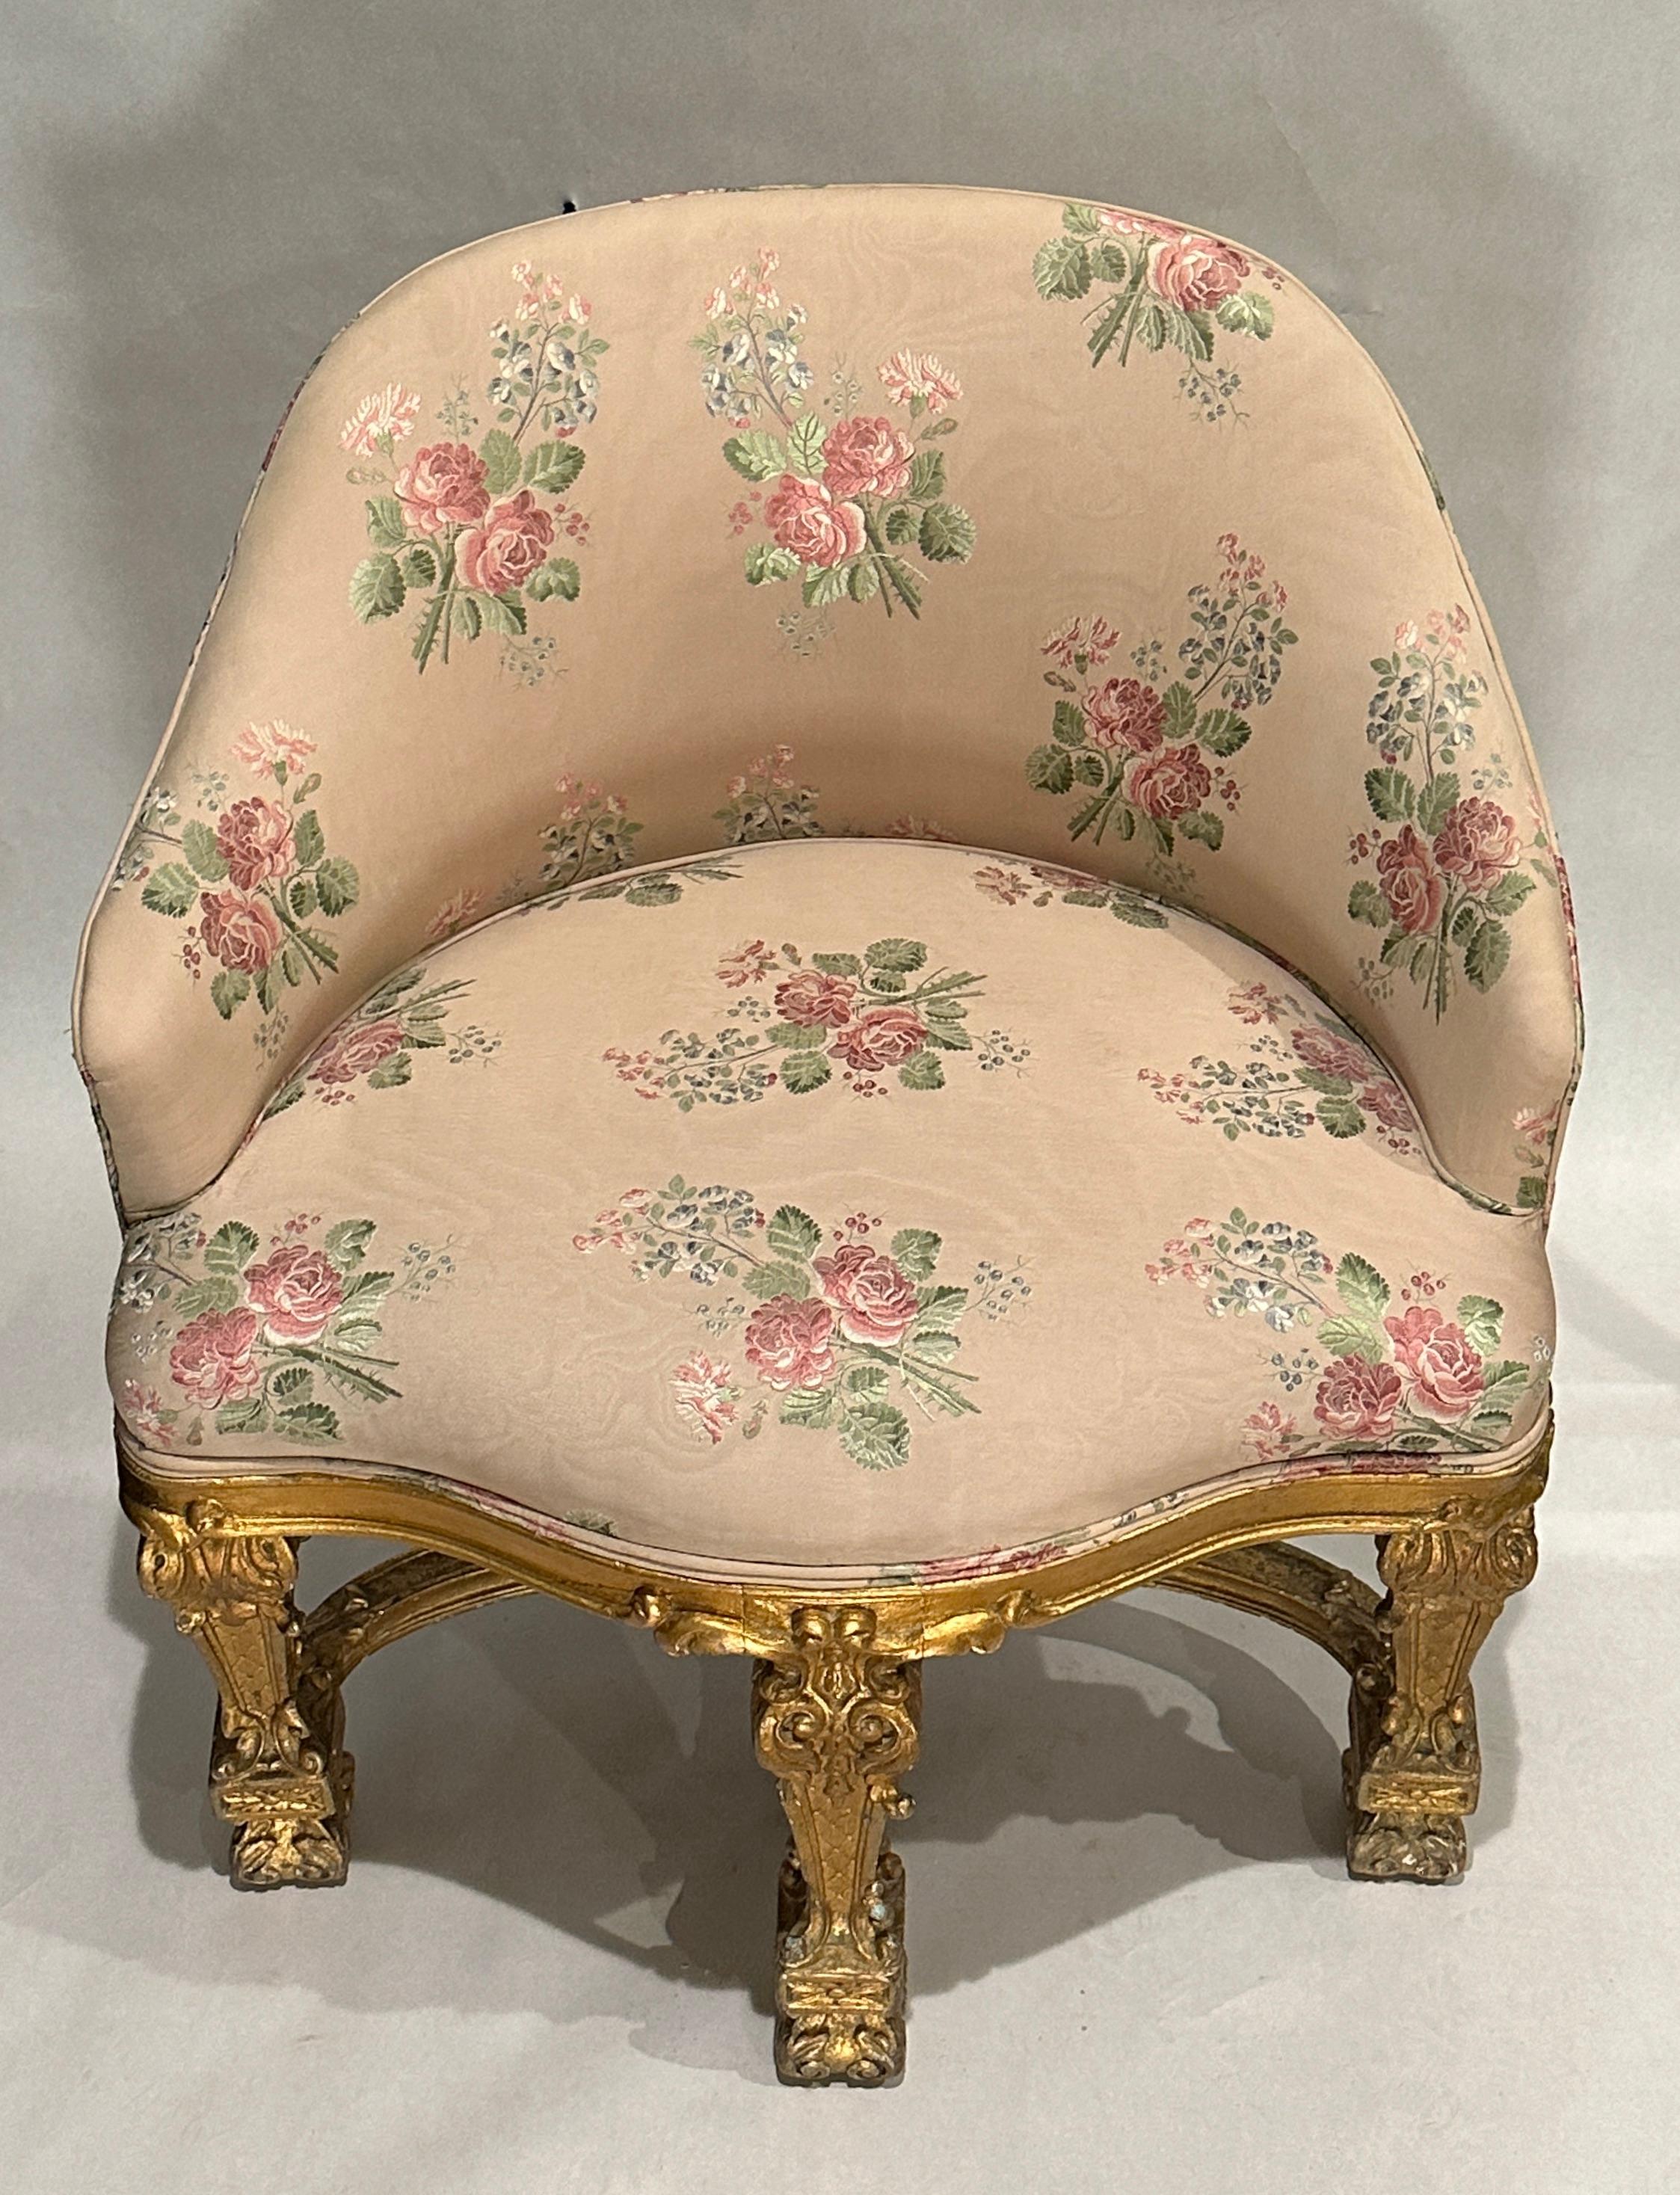 19th century French baroque carved and gilt vanity chair. Upholstered in a vintage fine and colorful brocade of roses and foliage. 